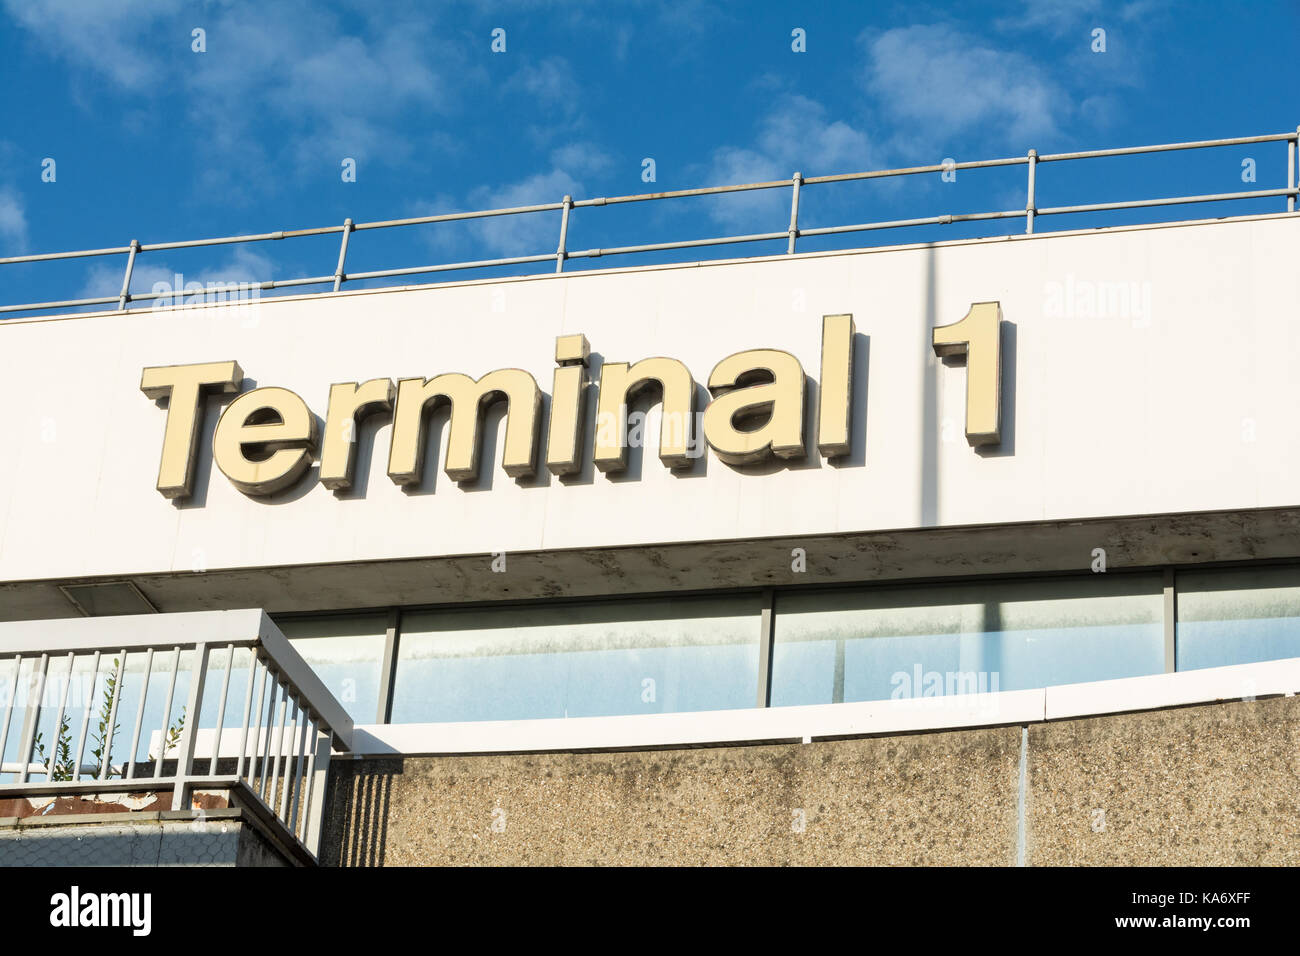 The now disused Terminal 1 building at Heathrow Airport, London, UK Stock Photo